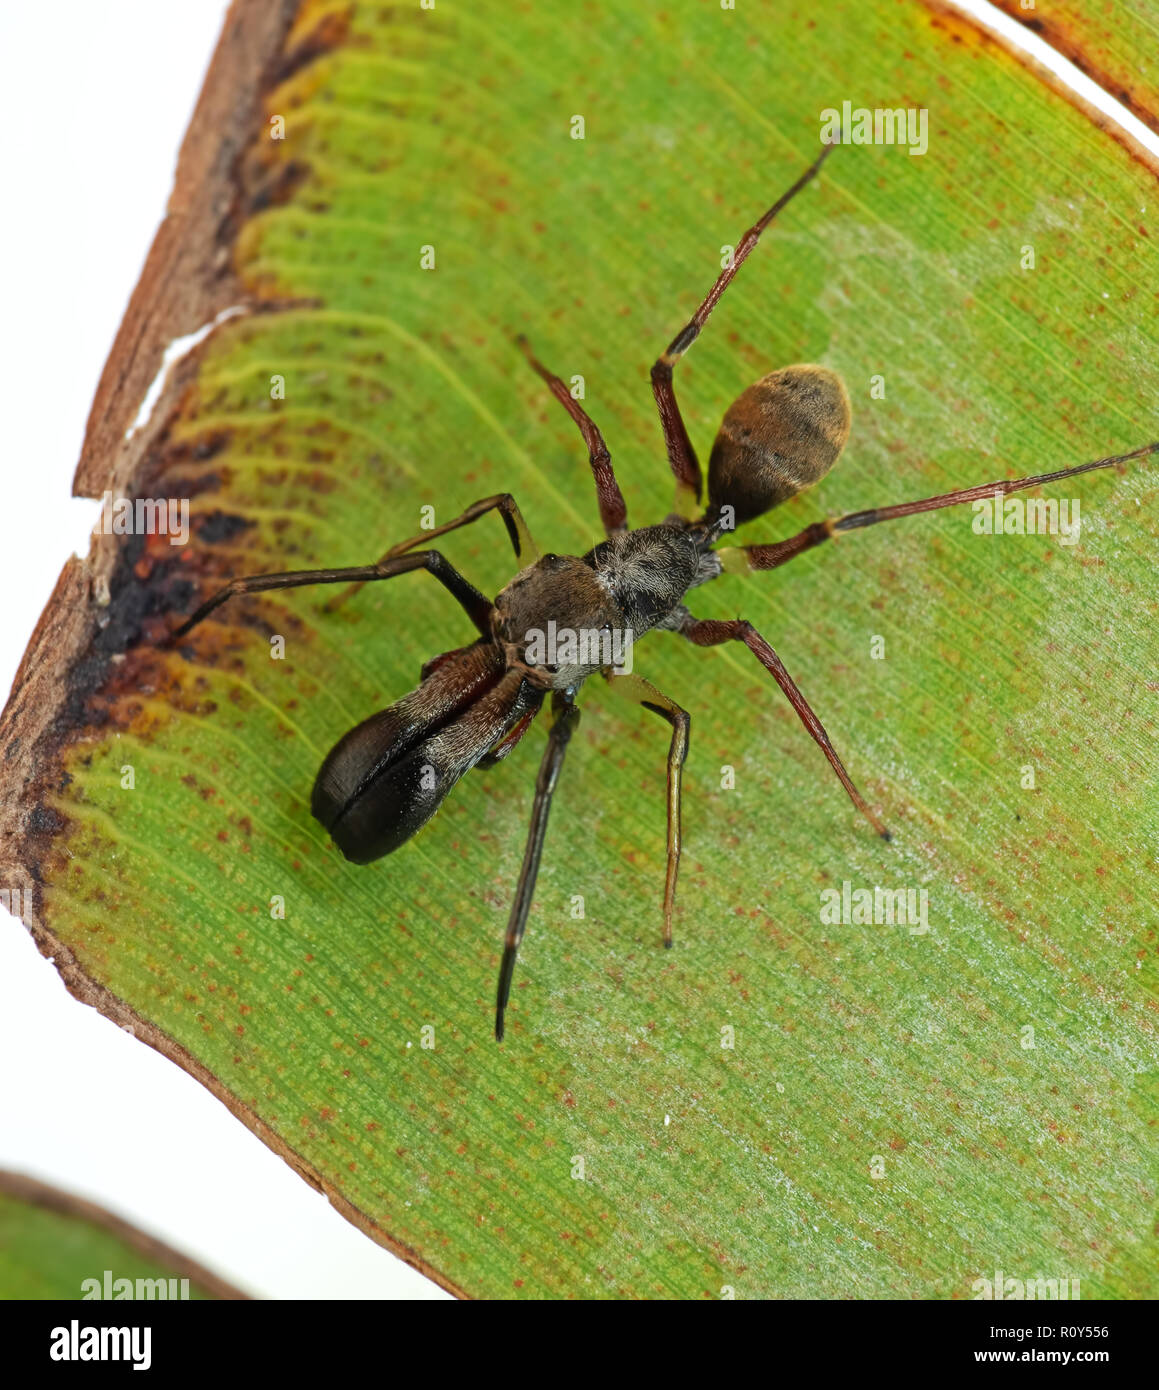 Macro Photography of Ant Mimic Jumping Spider on Back of Banana Leaf Stock Photo